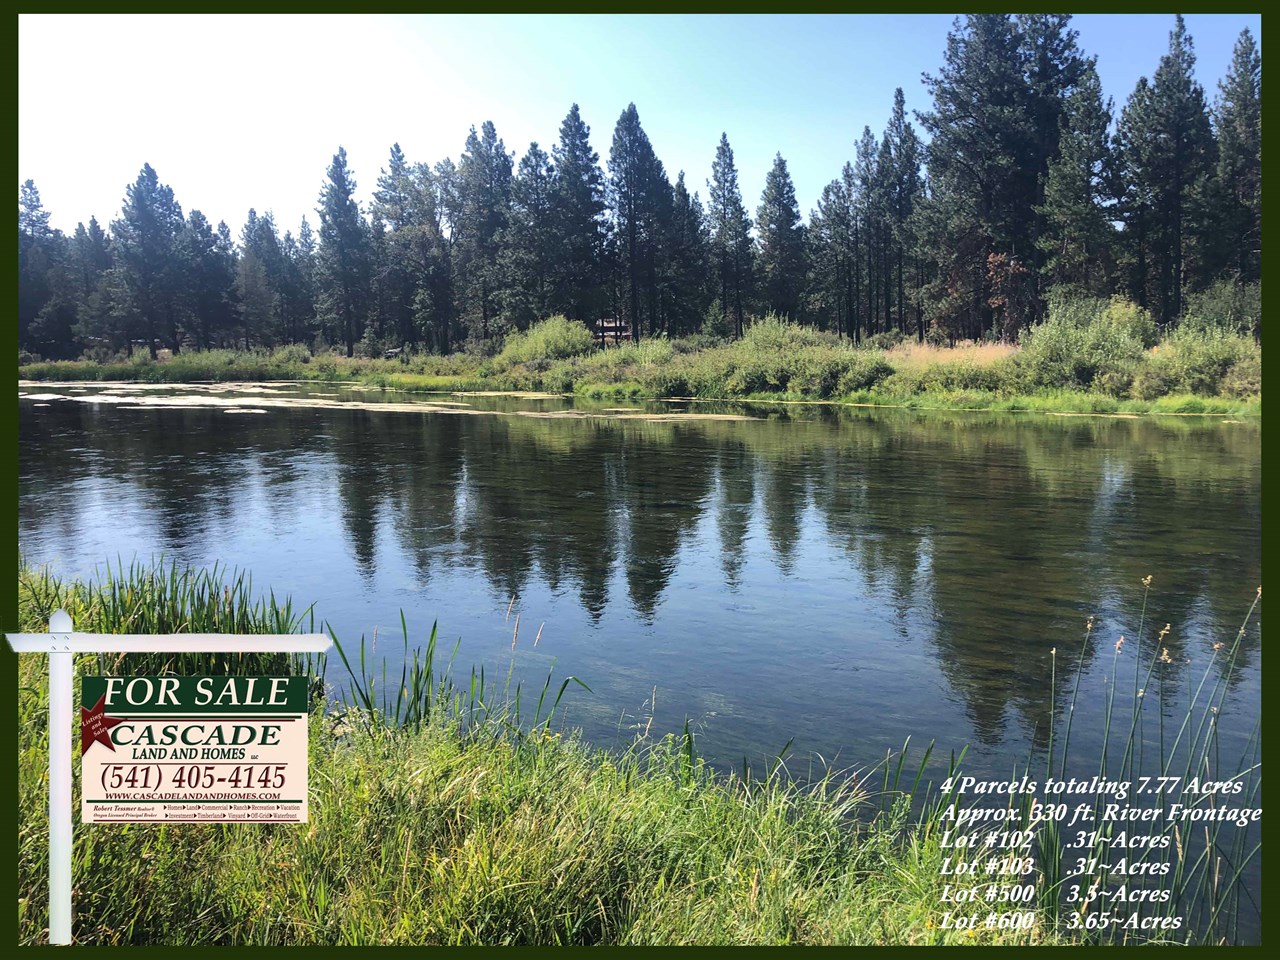 looking across the sprague river from  the riverbank of this unique property. take a long look at this photo, look again and imagine yourself sitting in a chair on the riverbank with this as your view! this is the good life! 



mls # 220156878 
lot #102, #103
2610/2620 south chiloquin road, chiloquin, oregon